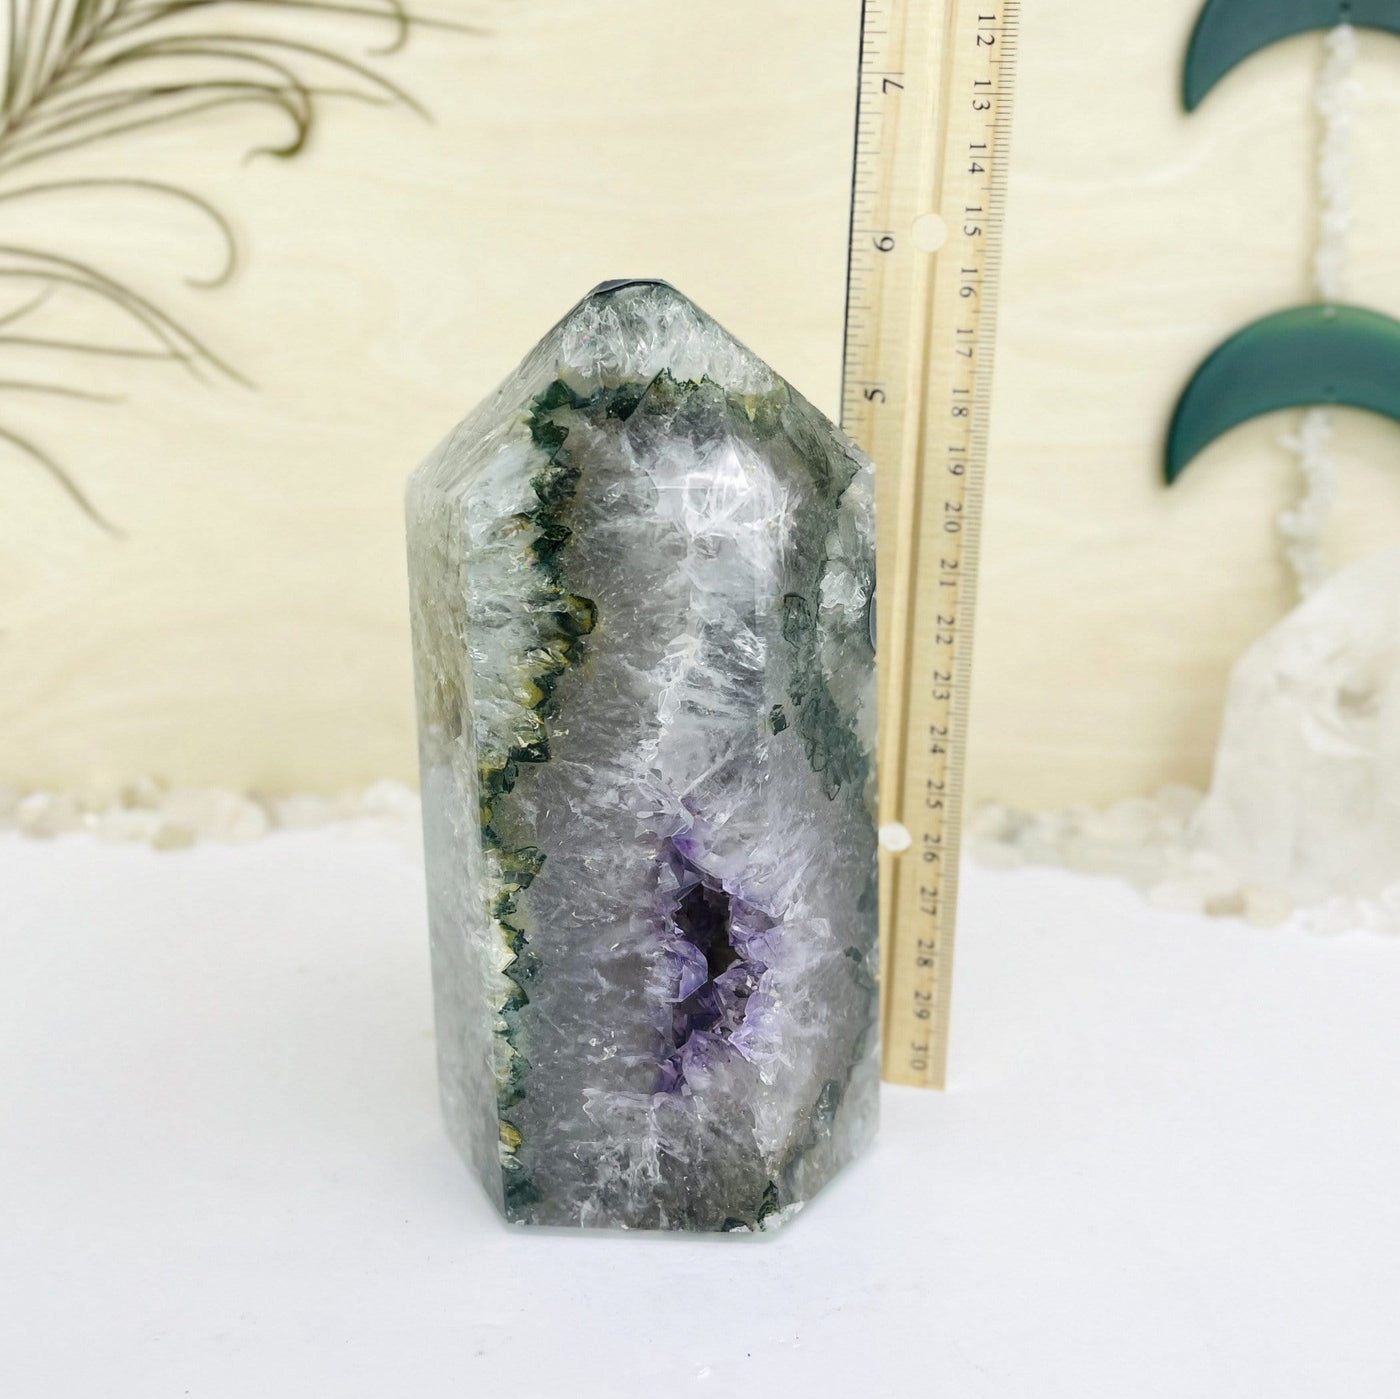 agate and amethyst polished tower. It is mostly white with green banding and a purple druzy cluster opening at the bottom. Shown next to a ruler showing it is almost 6" TALL.